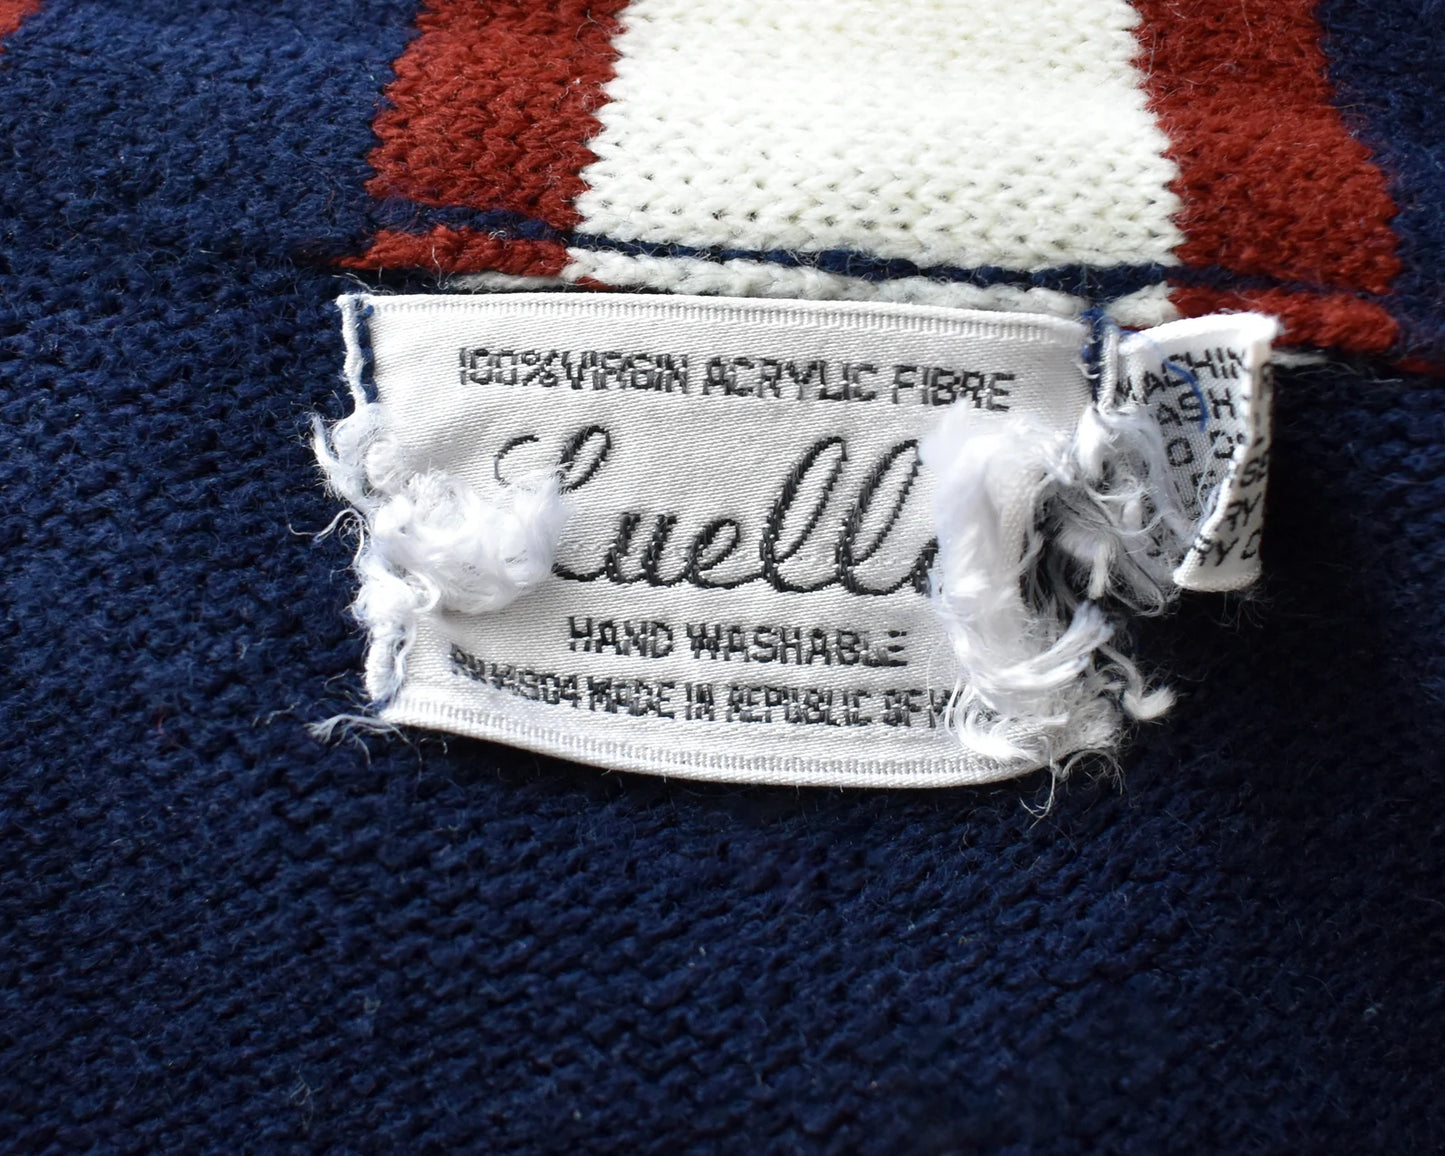 Close up of the tag which says Luella (tag is frayed)